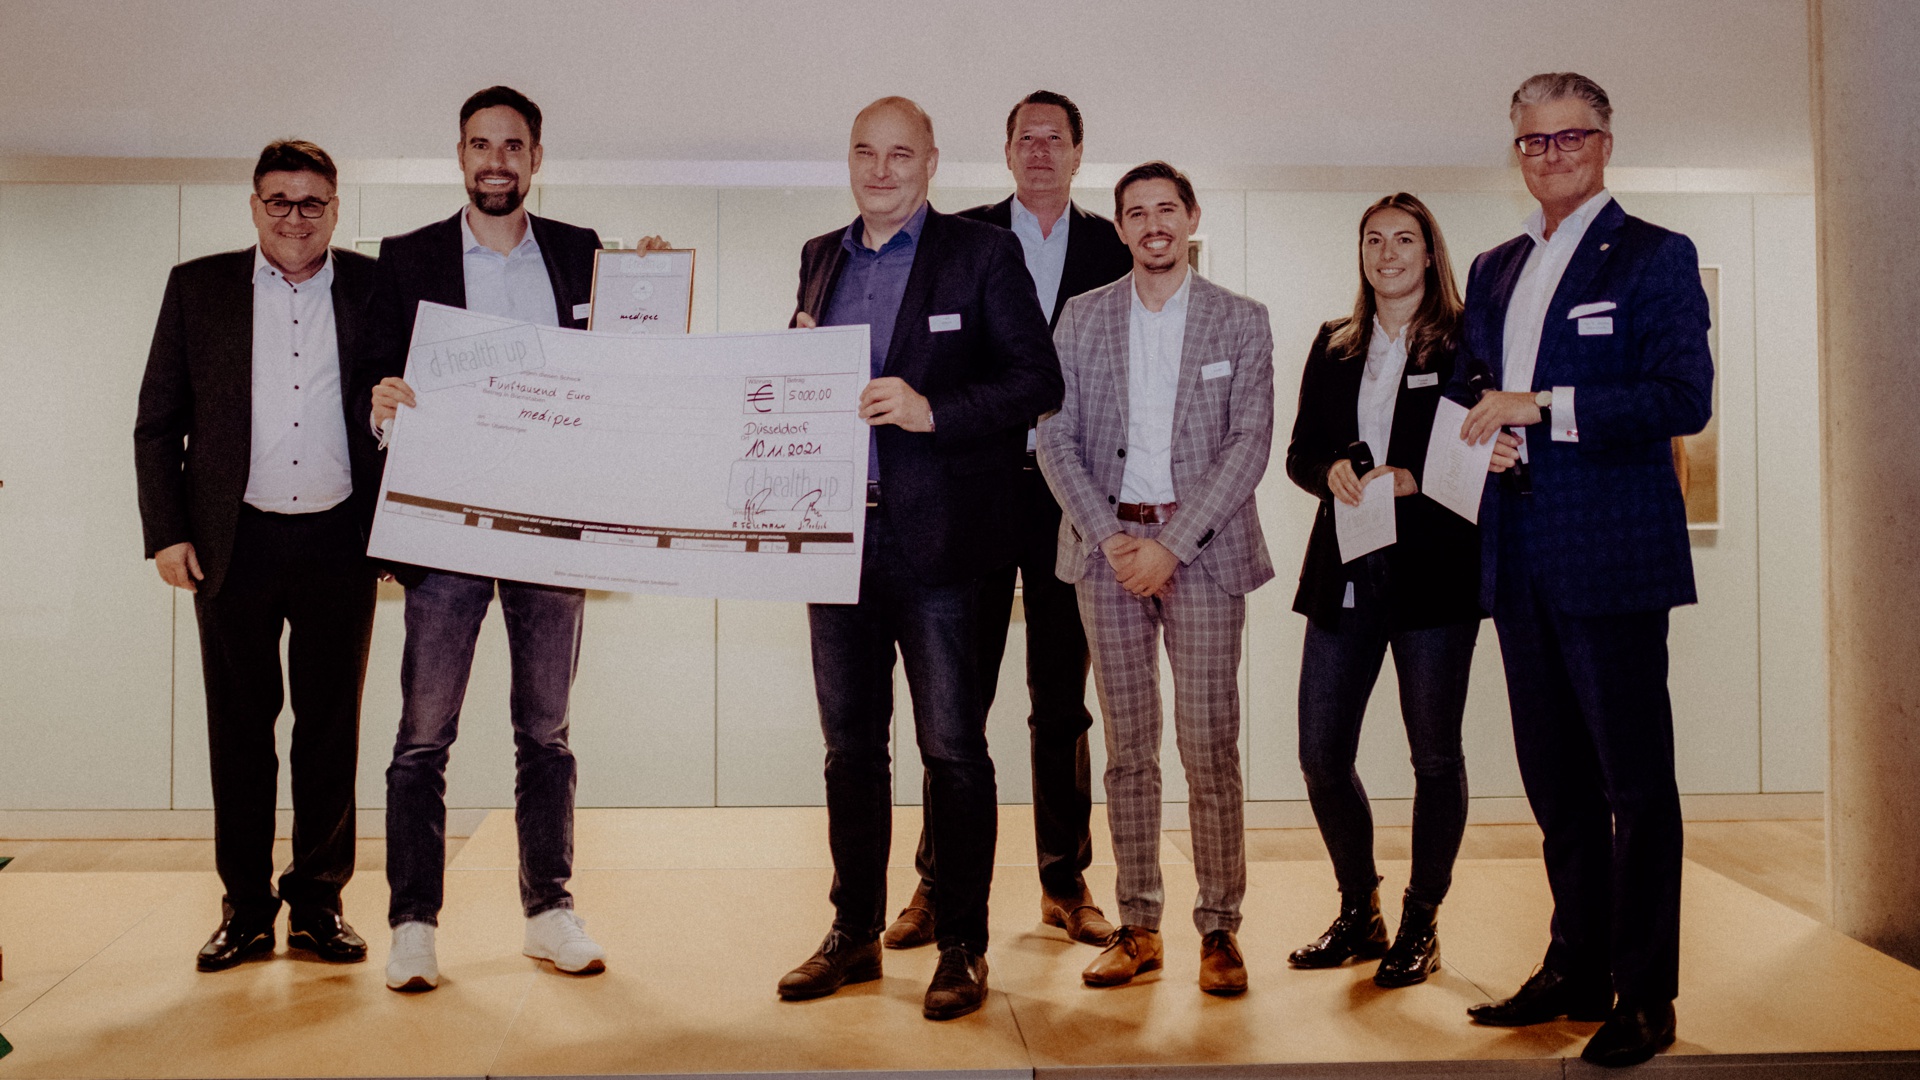 eHealth competition: Winning solution from Medipee awarded 5,000 euros